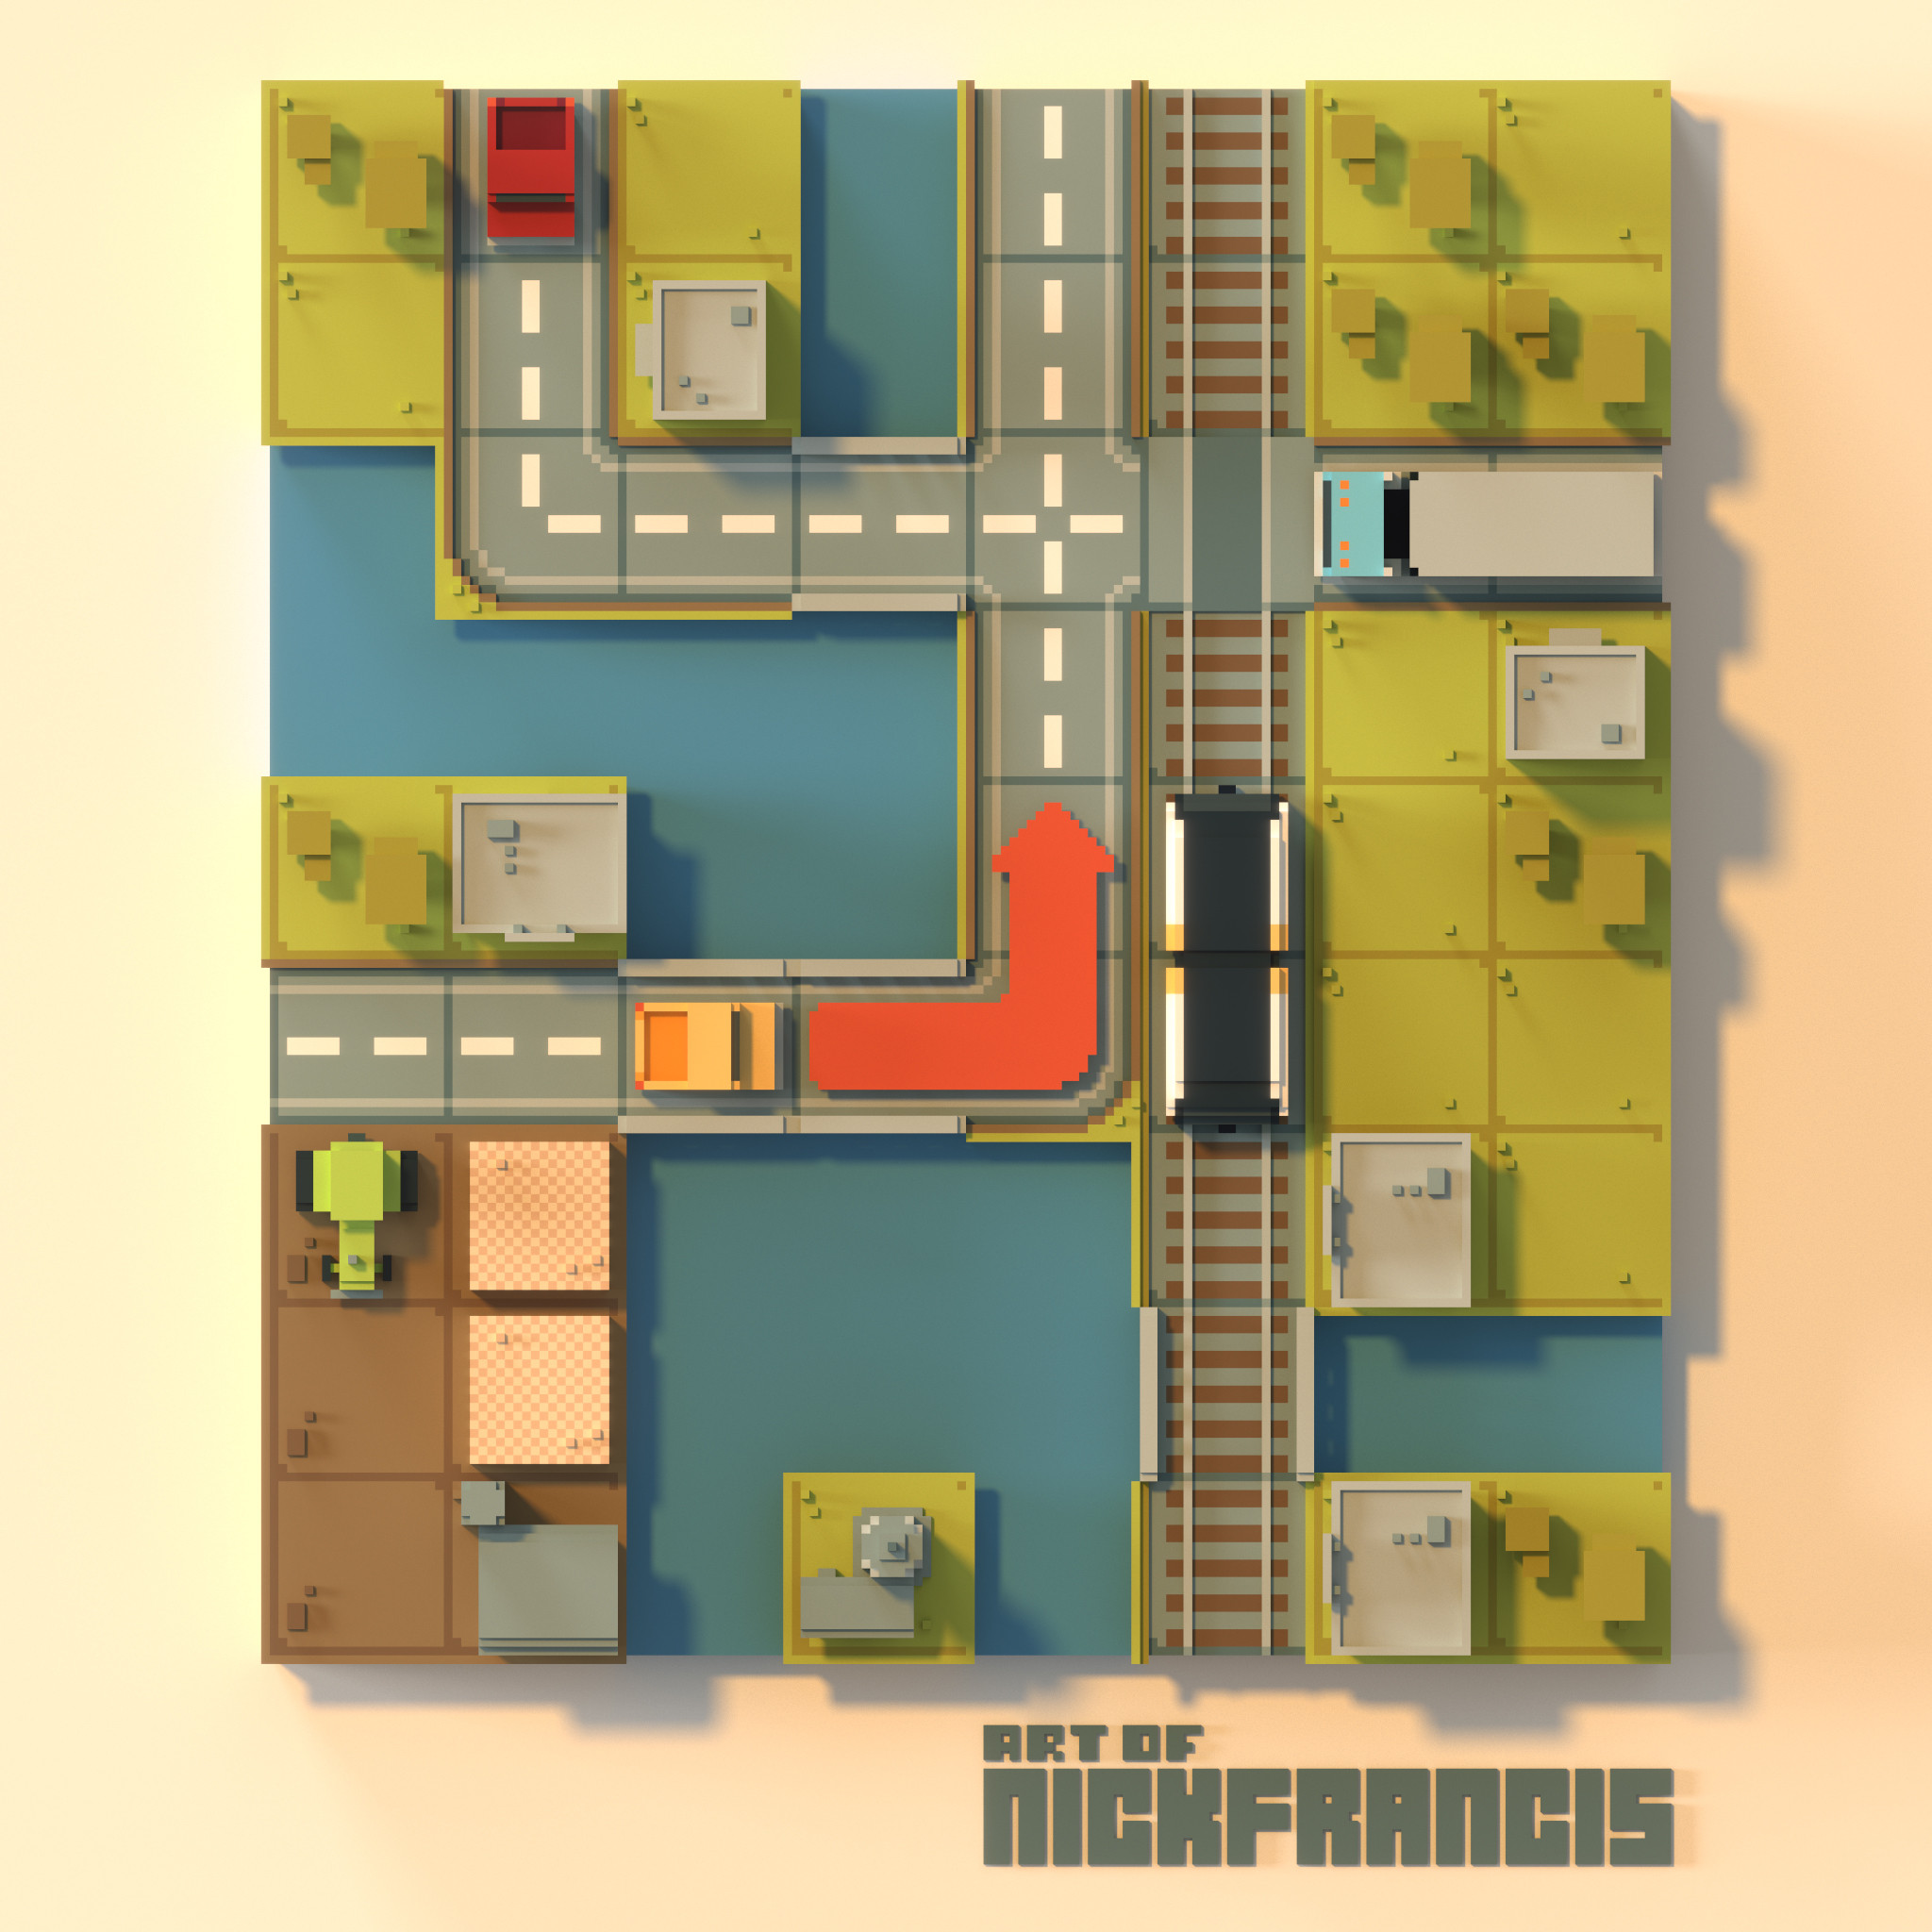 Rendering of various square grid-based voxel assets that forms the basis for a small town.